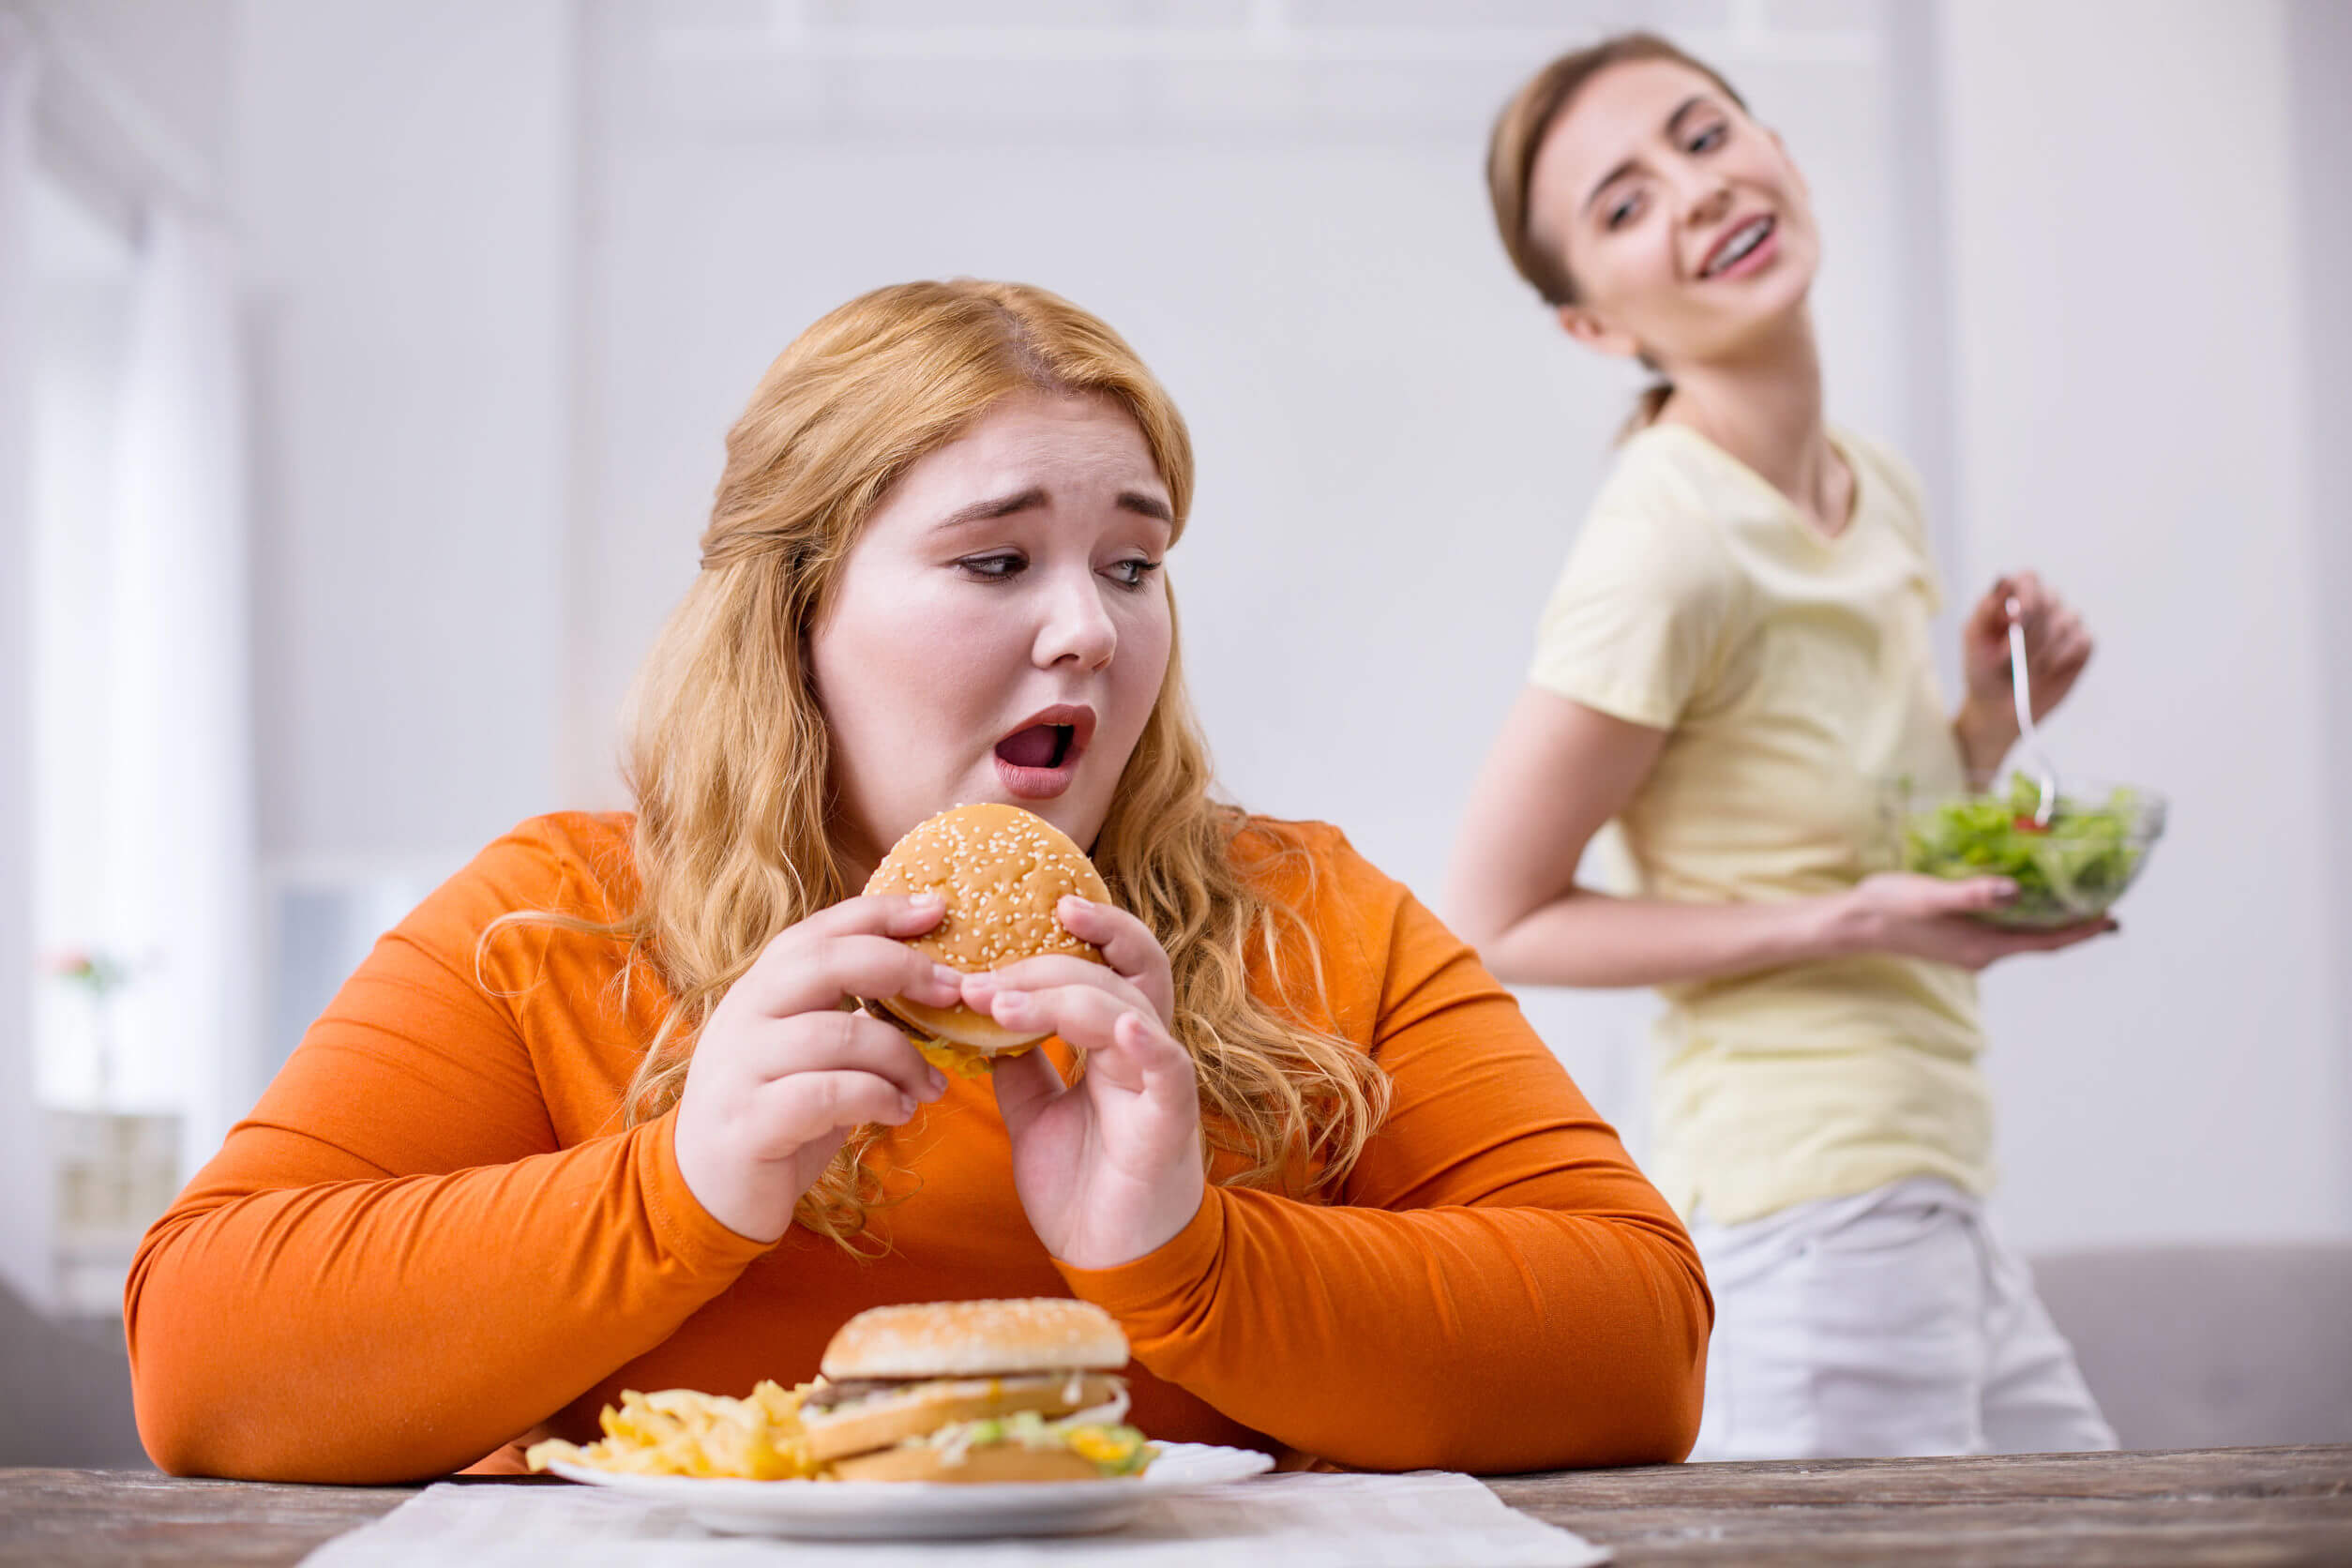 Junk food can promote weight gain.